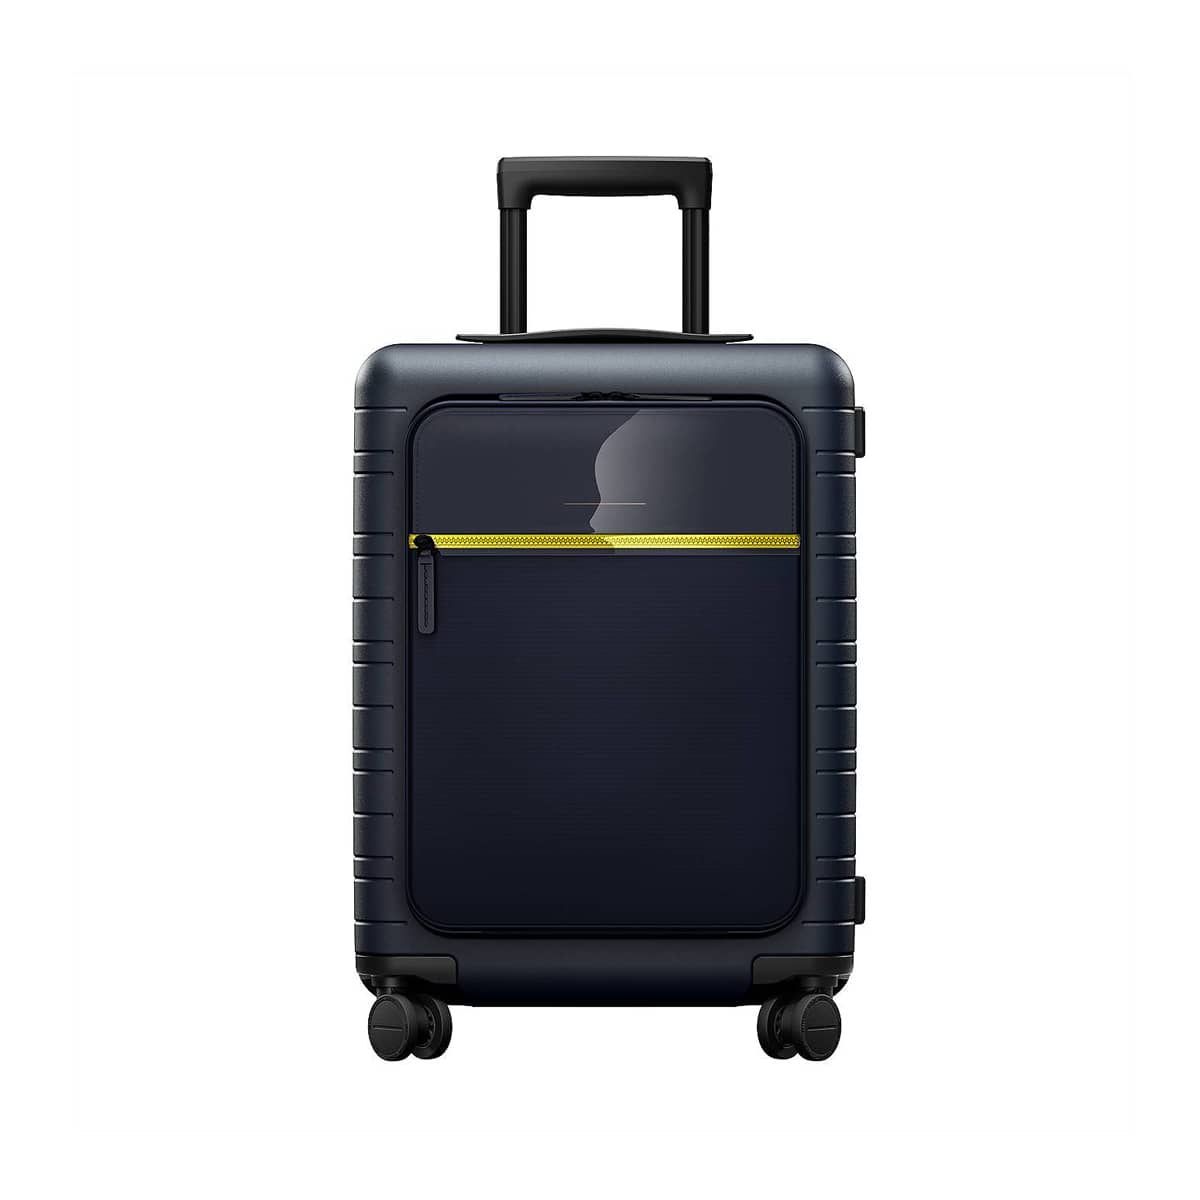 Best Carry-On Luggage for International Travel